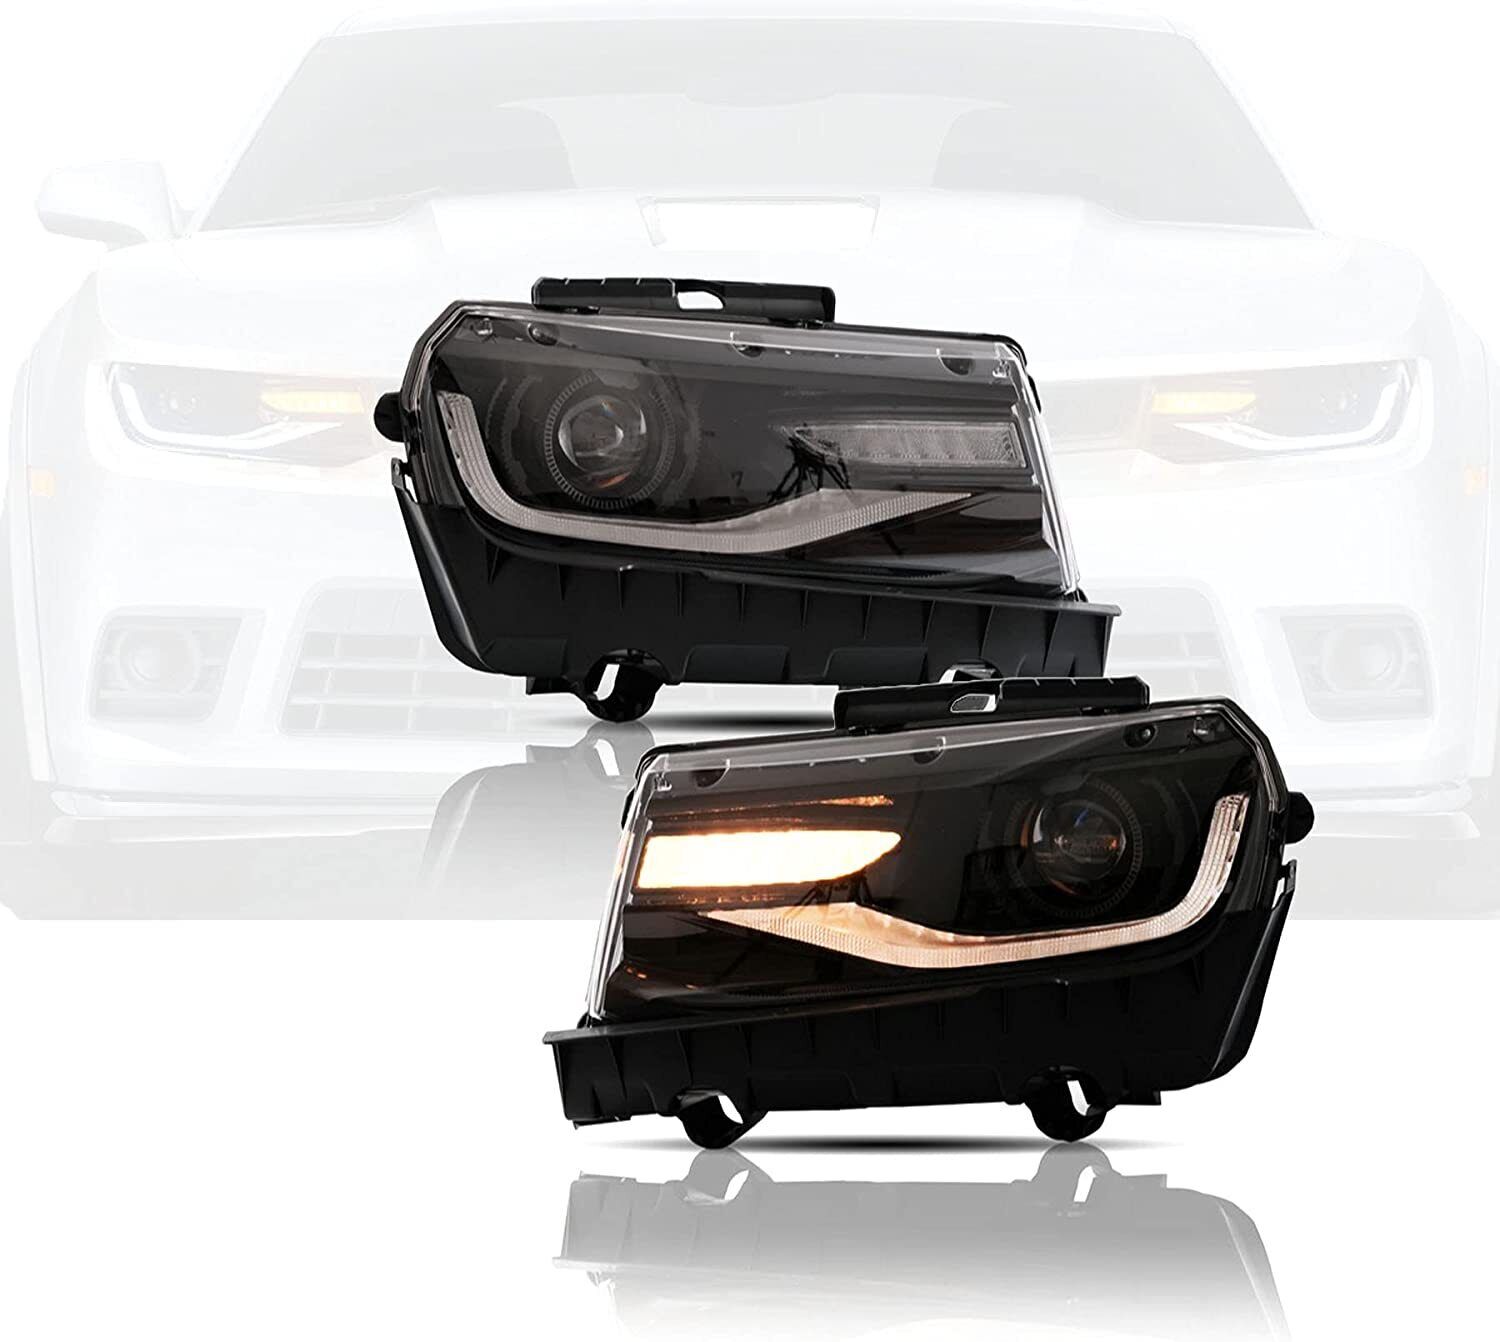 Projector LED Headlights 23398035 Dual Beam Lens For CHEVROLET CAMARO 2014-2015